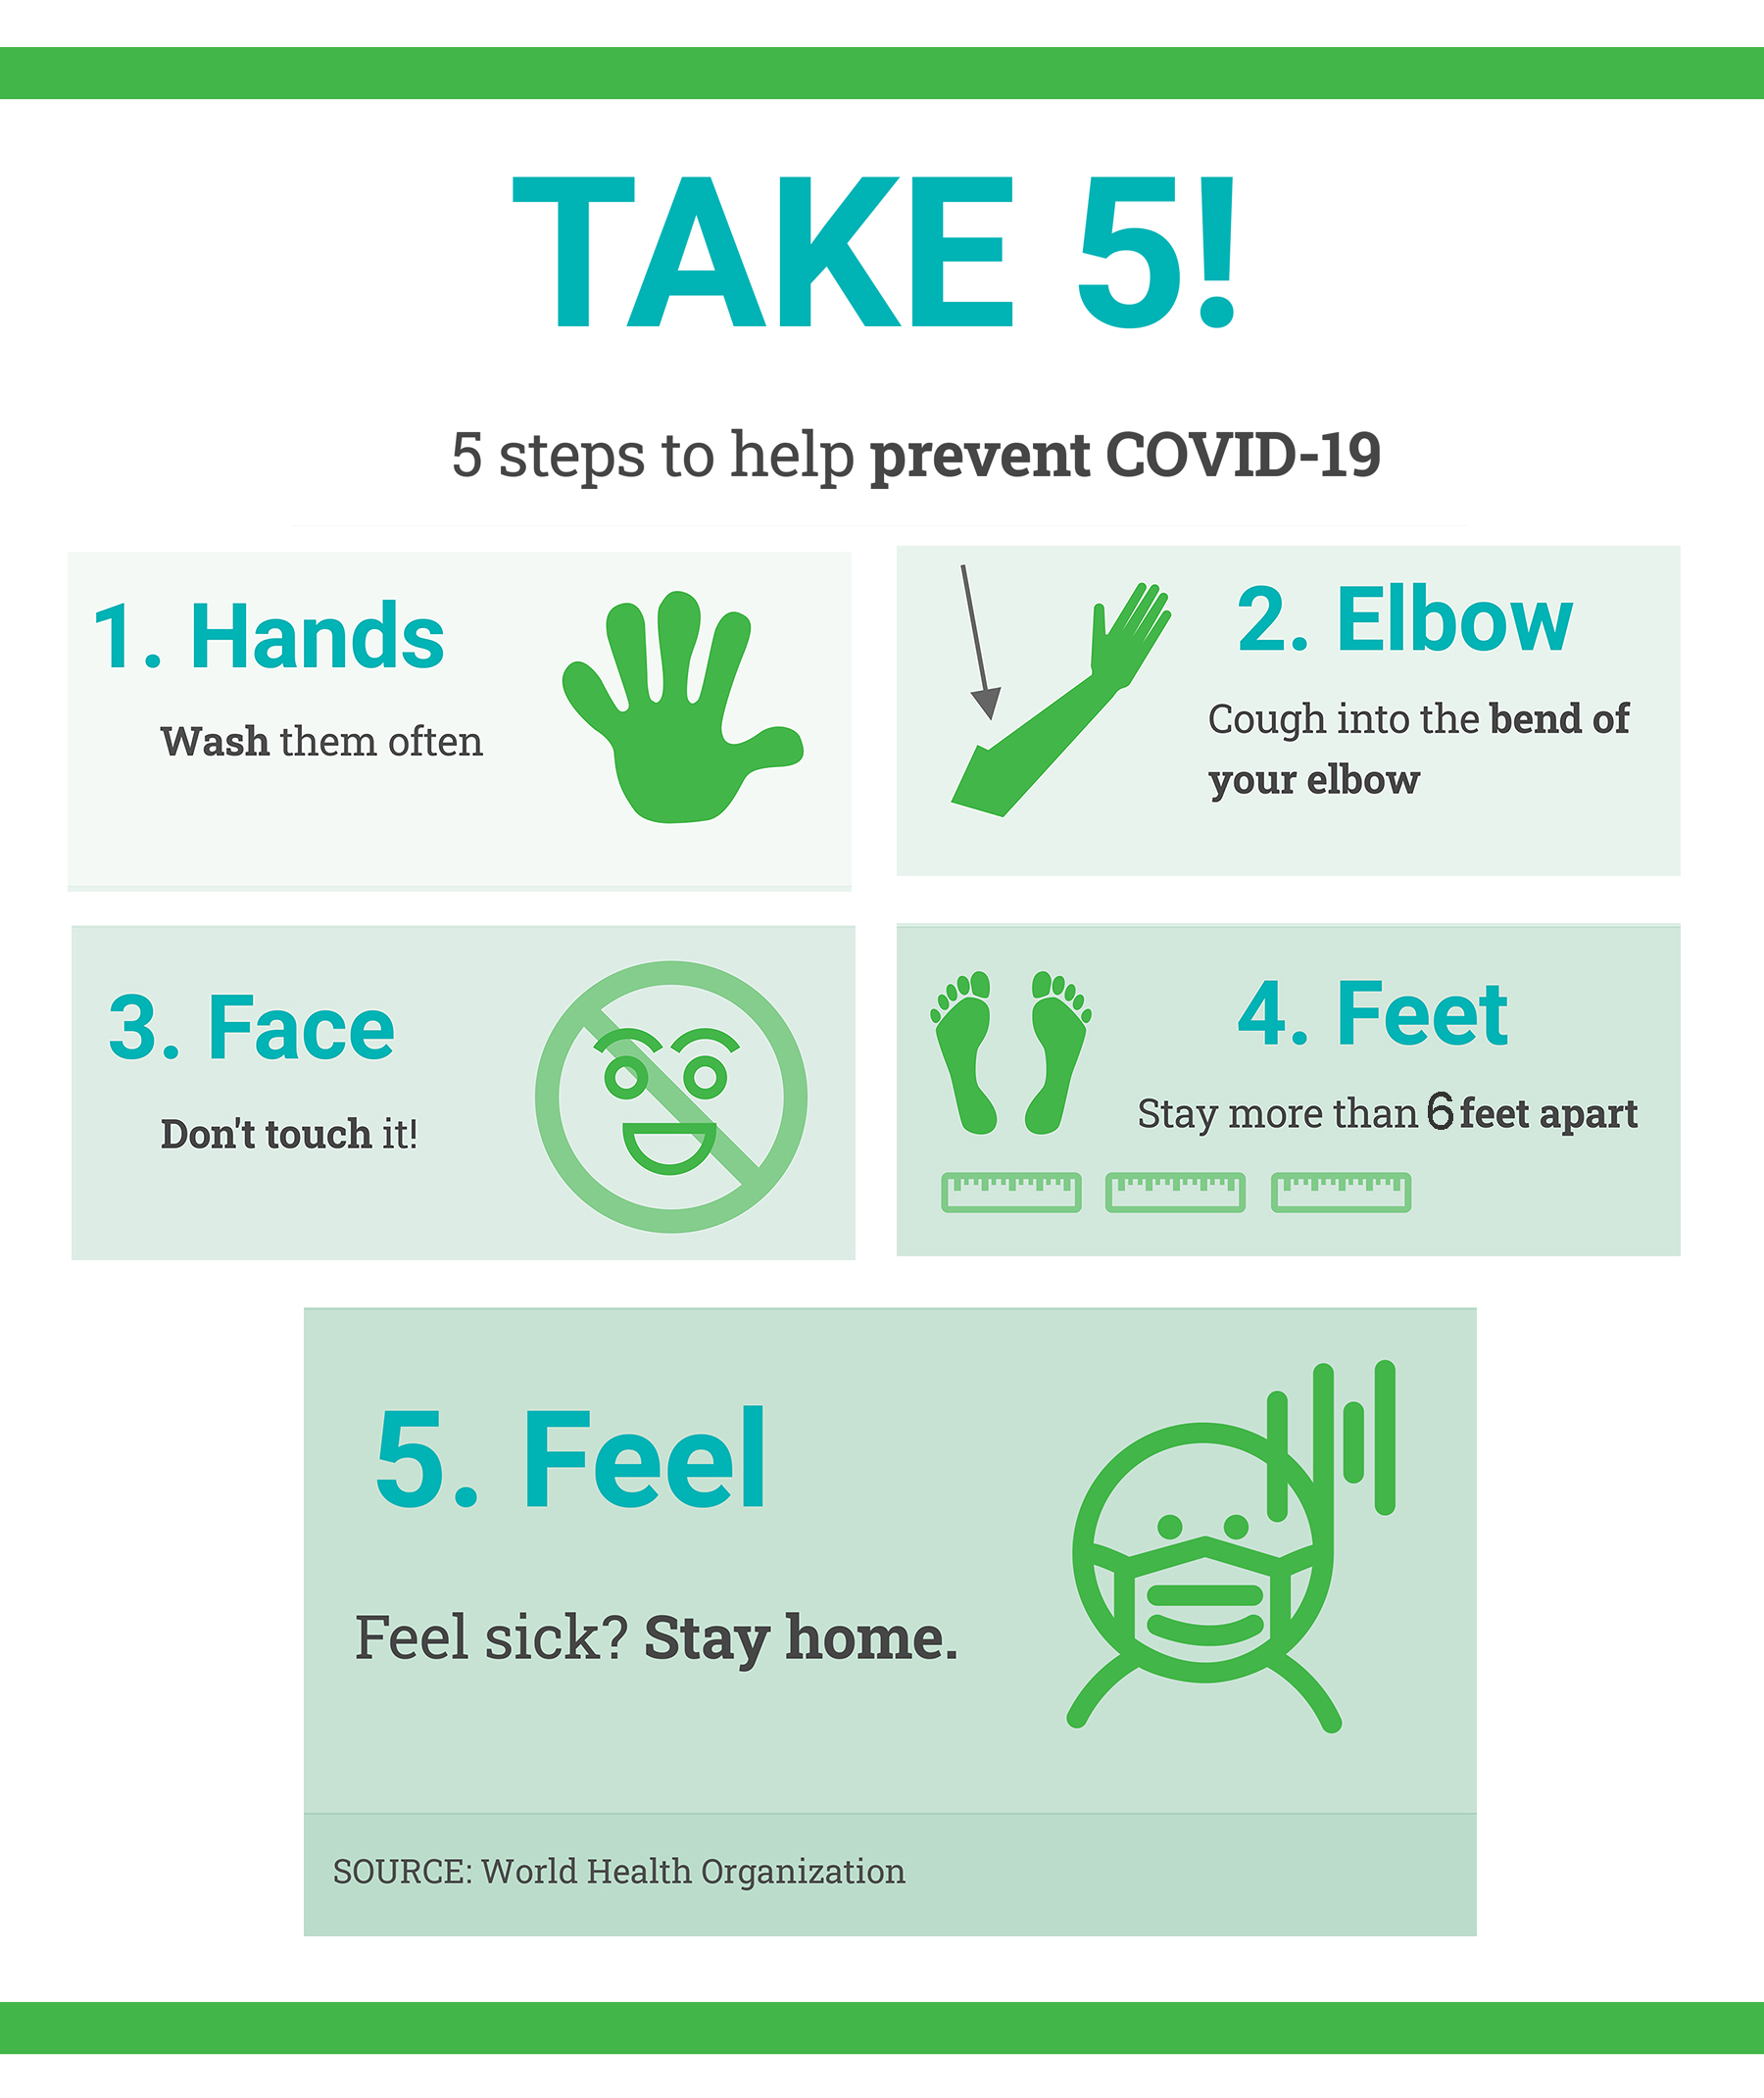 An image with 5 steps to take to protect against COVID-19